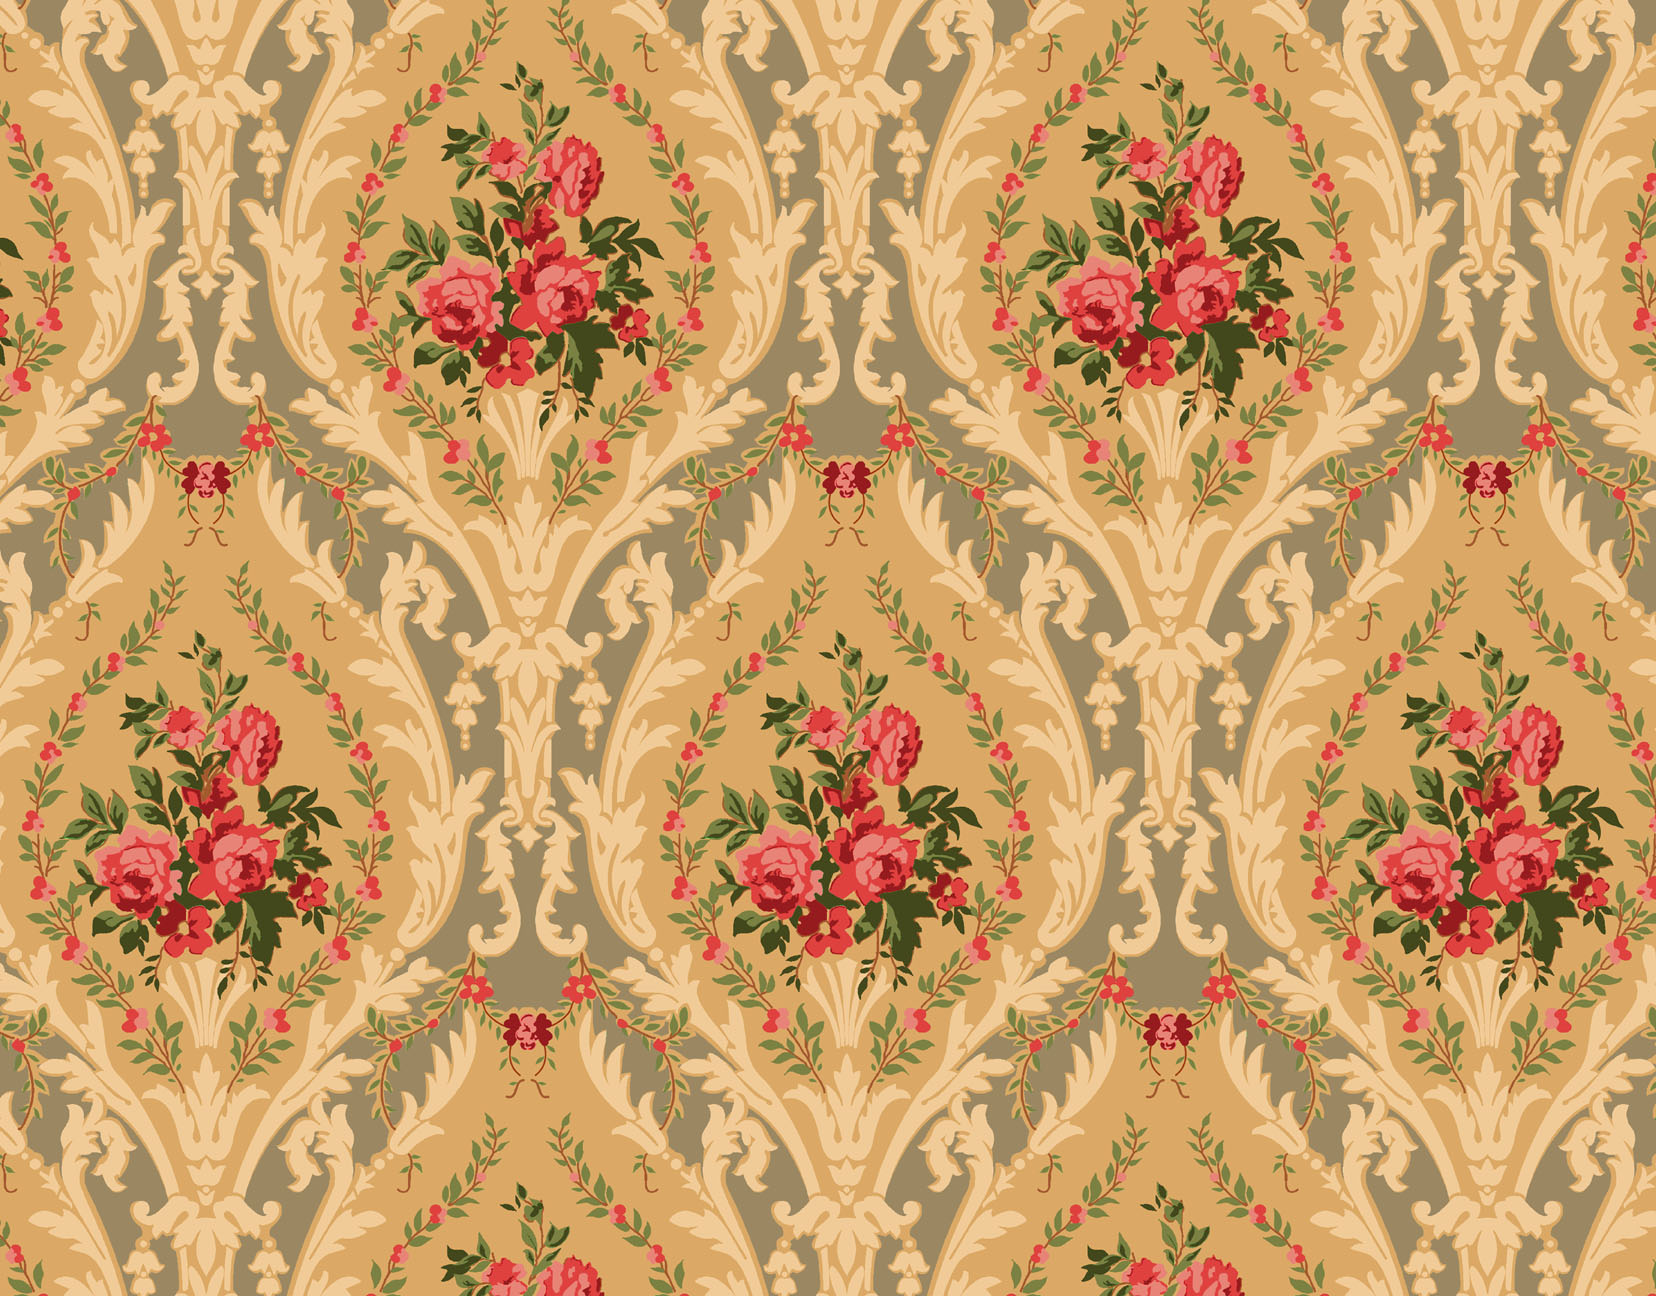  Victorian Early Arts and Crafts   Historic Wallpapers   Victorian